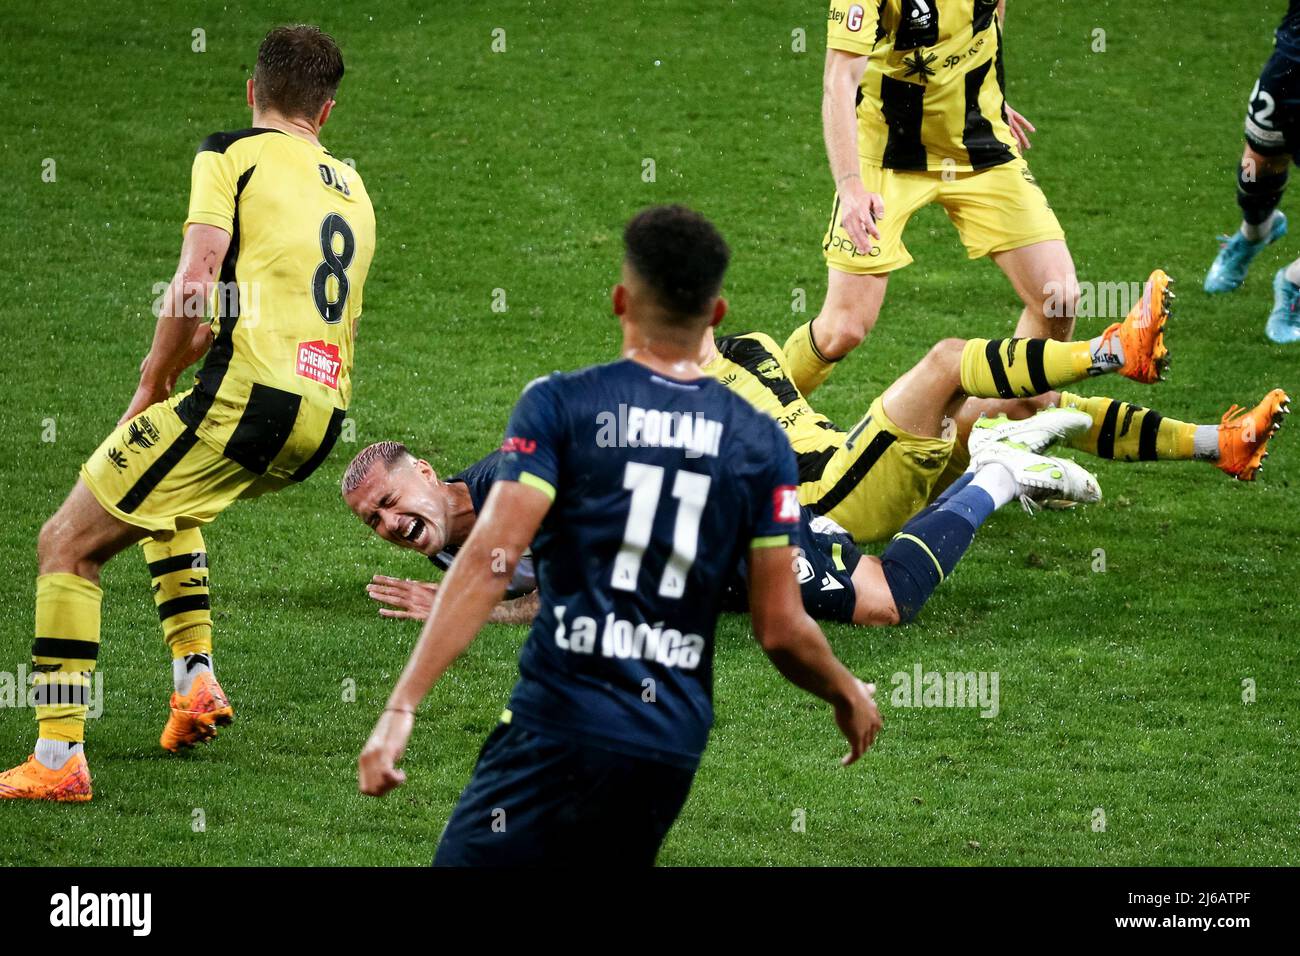 Melbourne, Australia, 29 April, 2022. Jason Davidson of Melbourne Victory falls during the A-League soccer match between Melbourne Victory and Wellington Phoenix at AAMI Park on April 29, 2022 in Melbourne, Australia. Credit: Dave Hewison/Speed Media/Alamy Live News Stock Photo